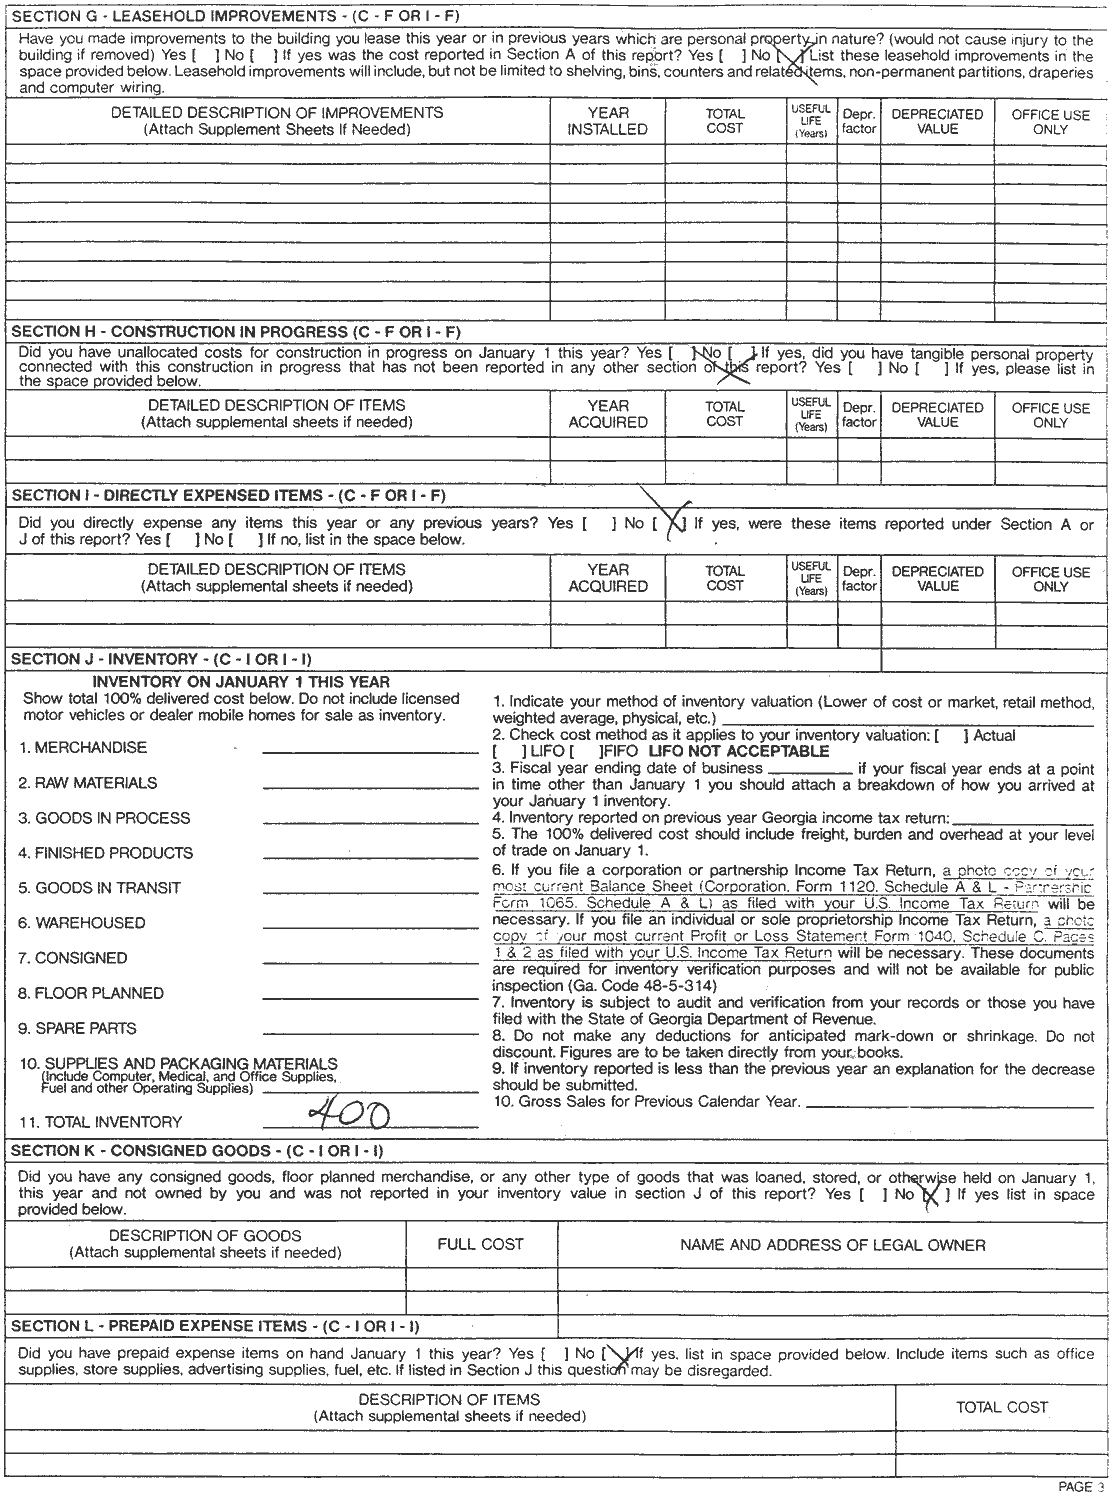 1999 Business Personal Property Report - alternate - page 3